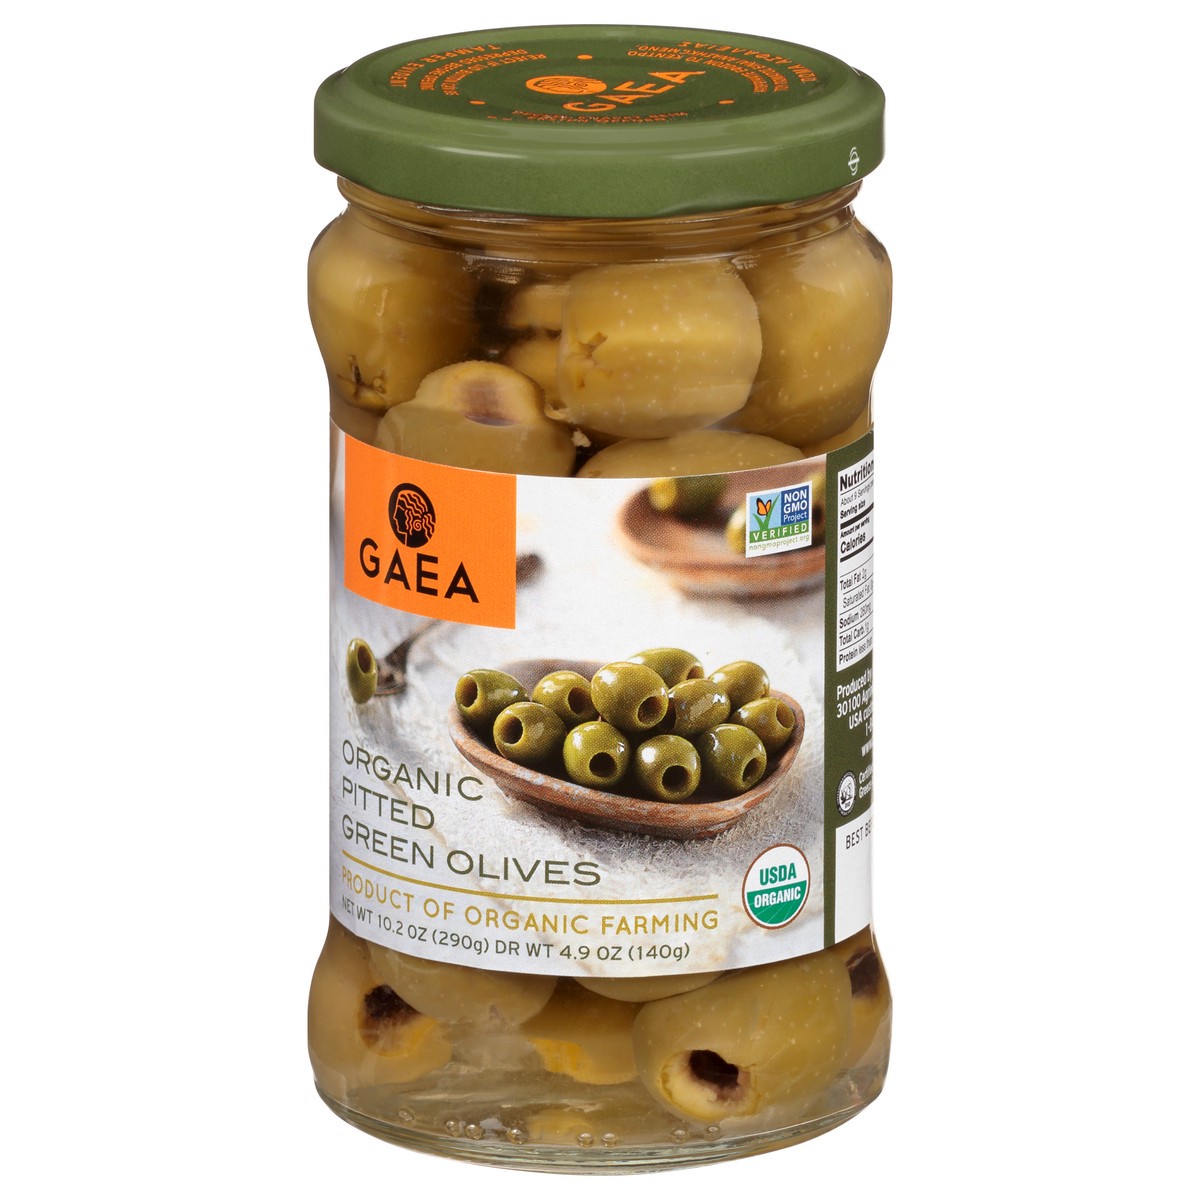 slide 13 of 13, Gaea Organic Pitted Green Olives 10.2 oz, 10.2 oz